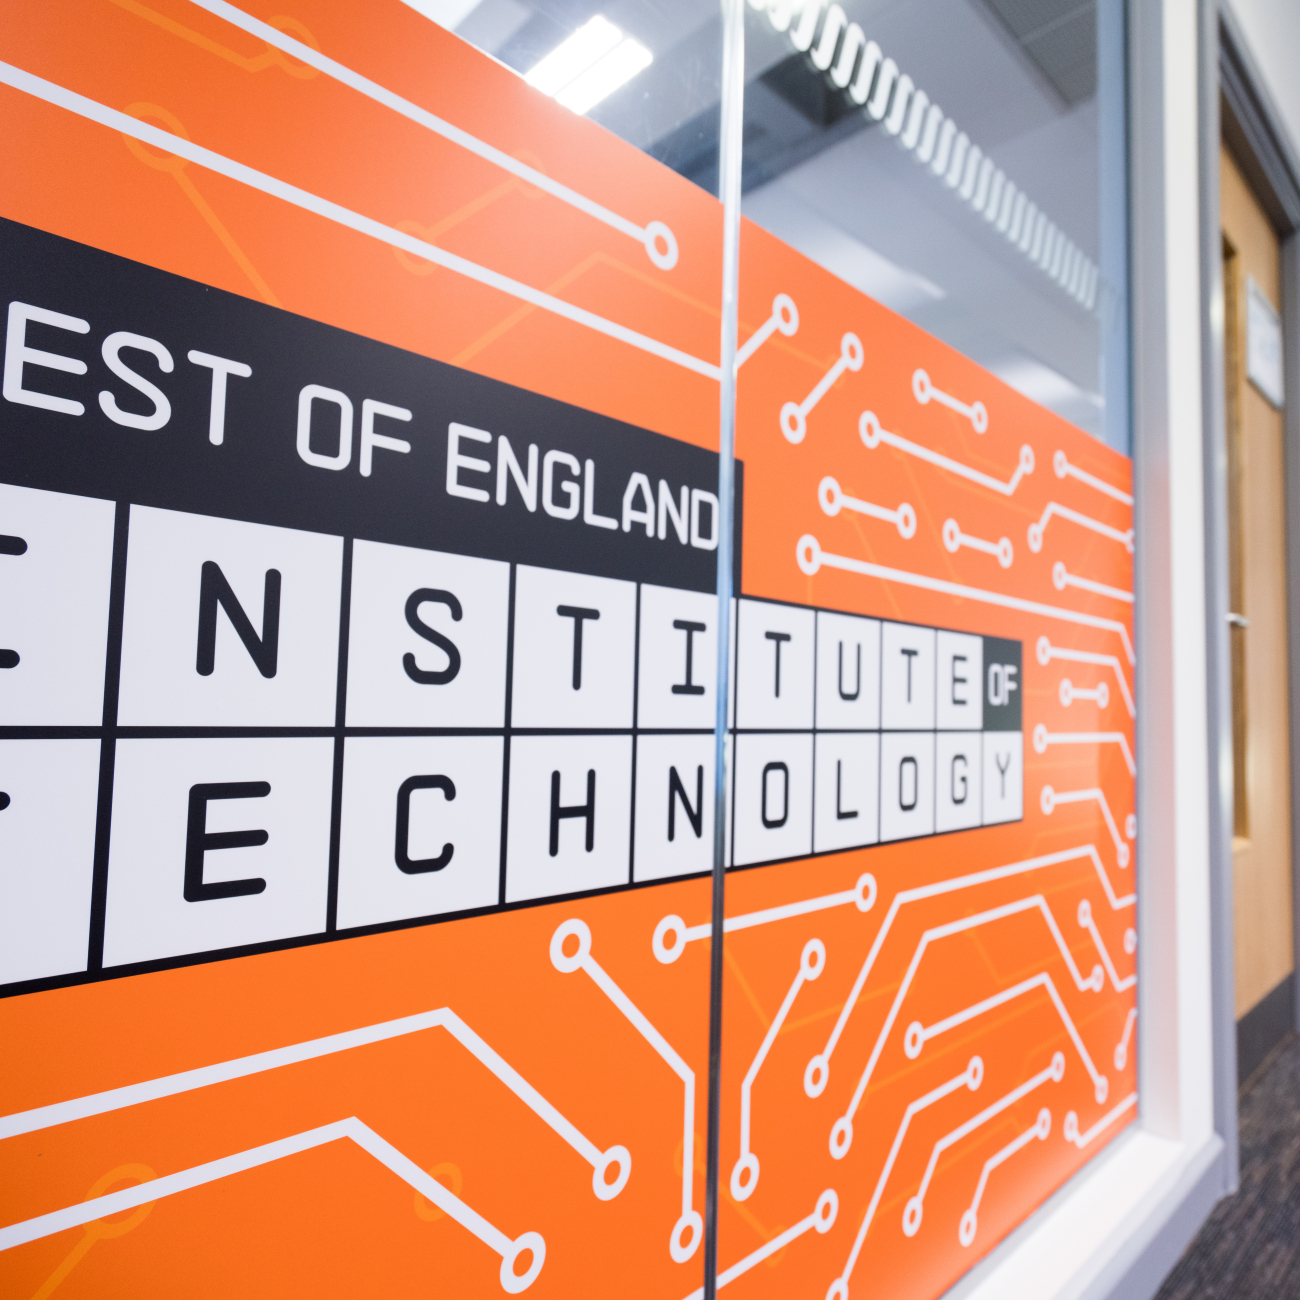 West of England Institute of Technology logo